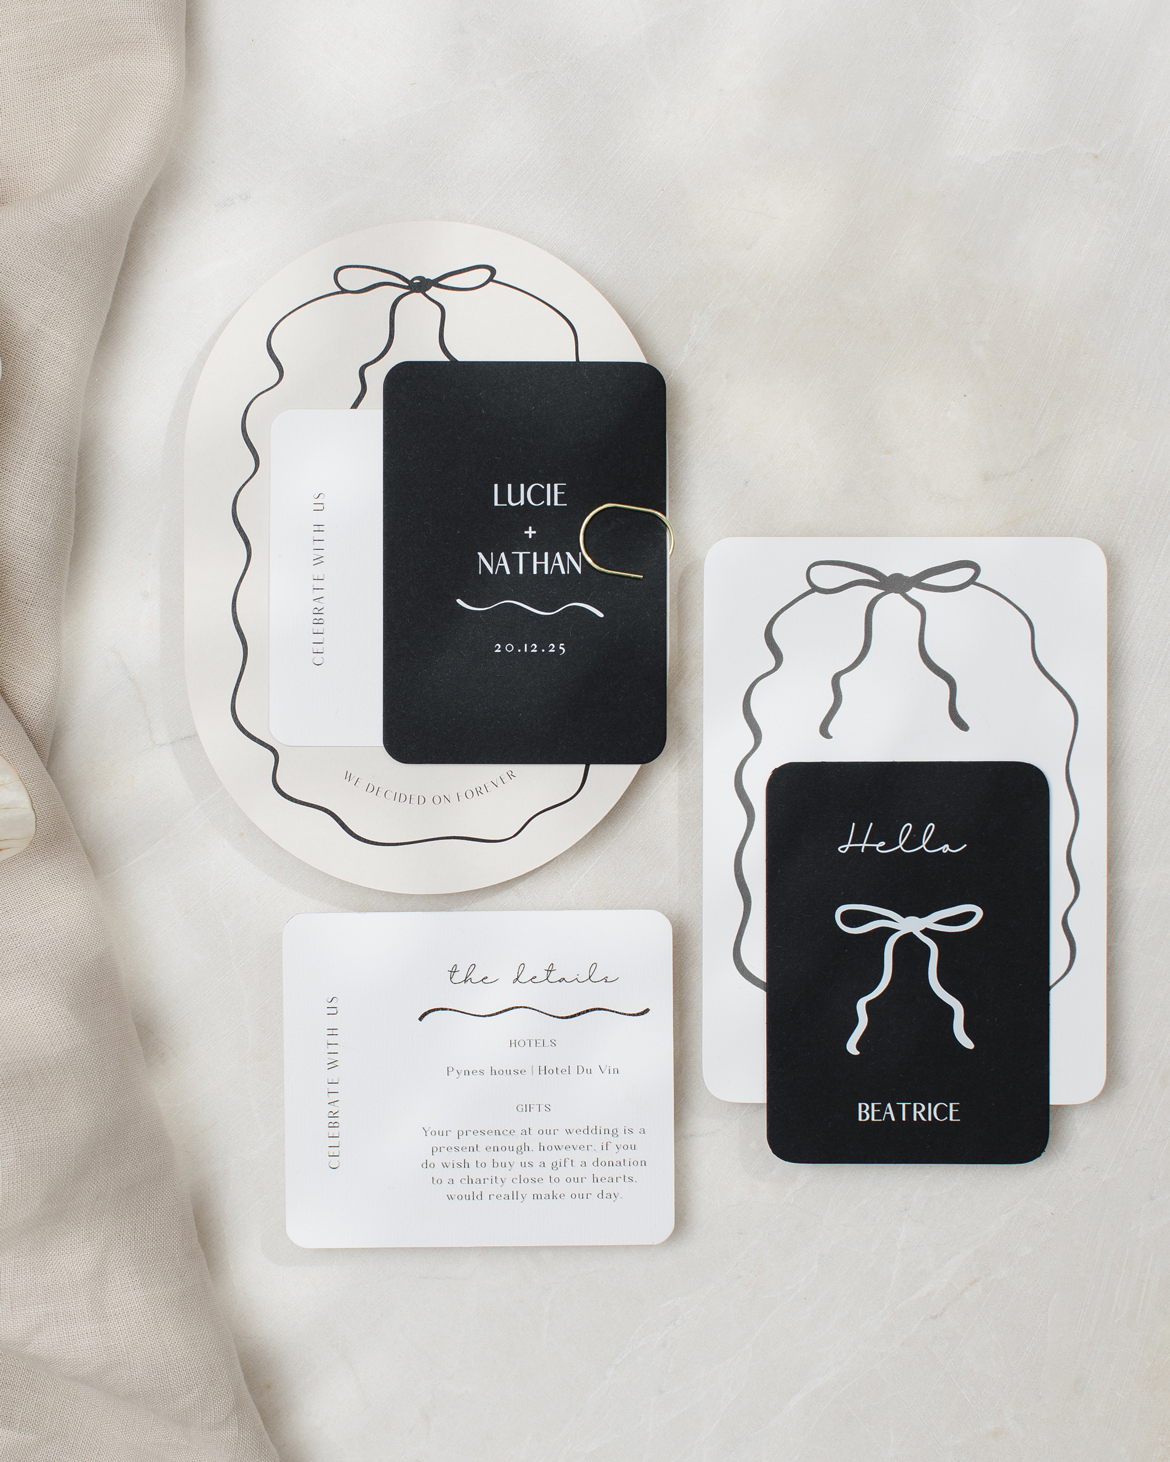 Double arch shape almond and black wedding stationery collection with hand drawn squiggly line border and bow.